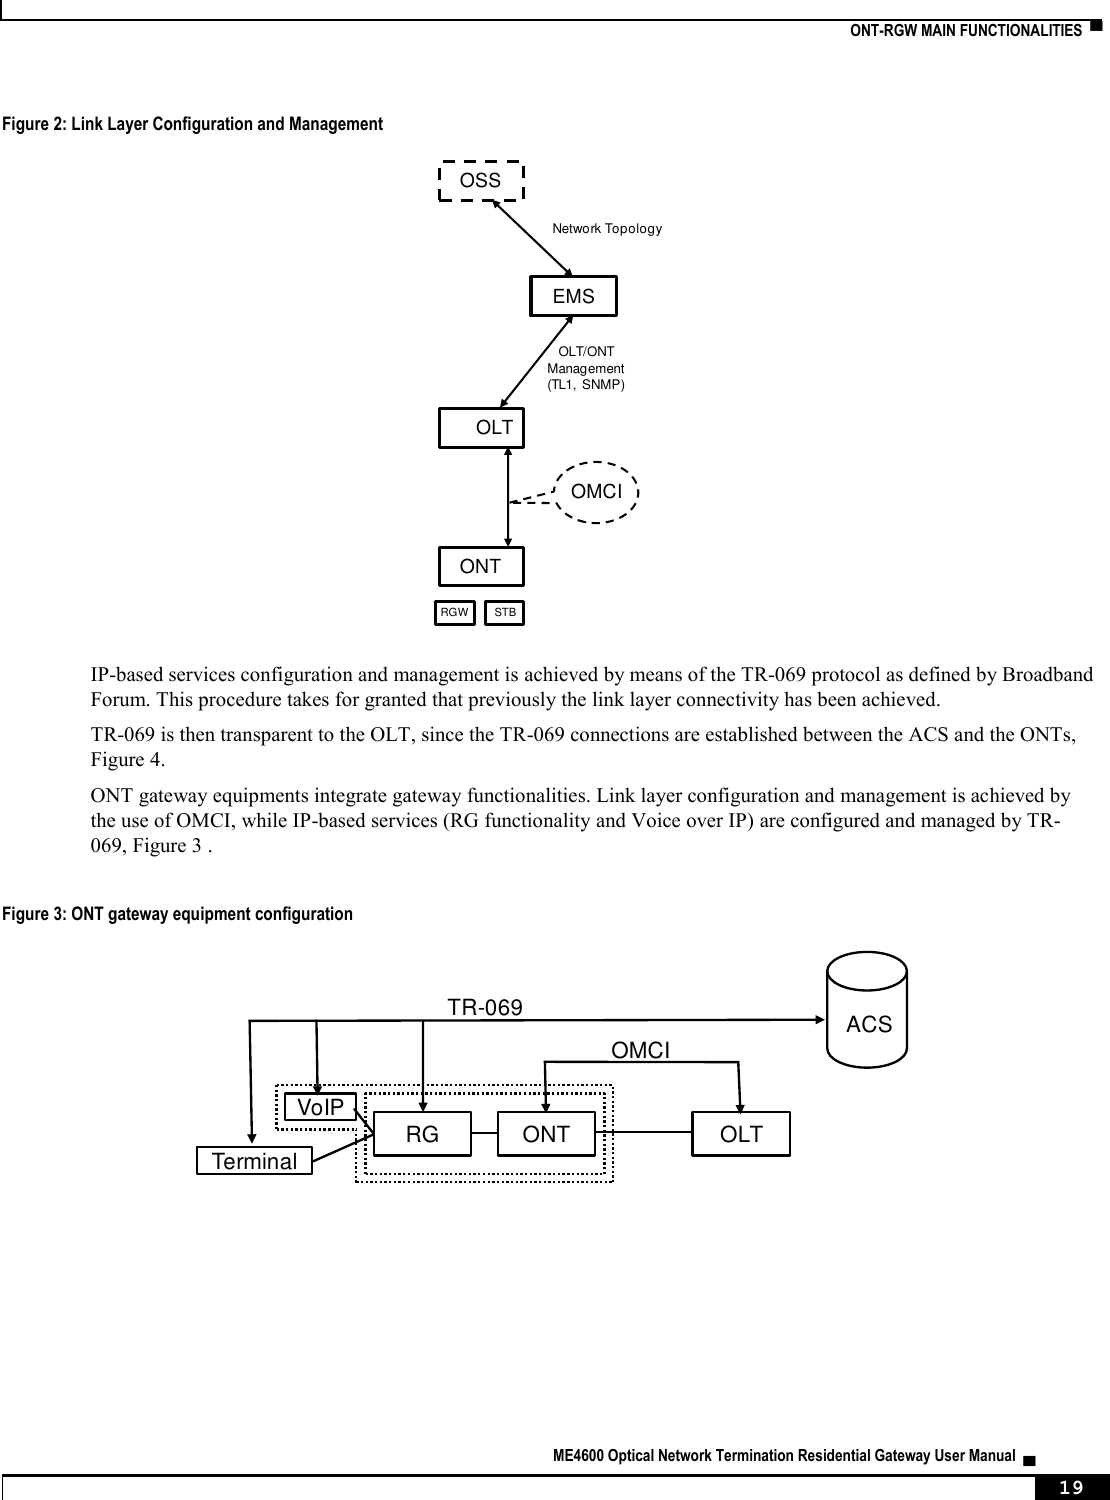    ONT-RGW MAIN FUNCTIONALITIES  ▀   ME4600 Optical Network Termination Residential Gateway User Manual  ▄     19 Figure 2: Link Layer Configuration and Management   IP-based services configuration and management is achieved by means of the TR-069 protocol as defined by Broadband Forum. This procedure takes for granted that previously the link layer connectivity has been achieved. TR-069 is then transparent to the OLT, since the TR-069 connections are established between the ACS and the ONTs, Figure 4. ONT gateway equipments integrate gateway functionalities. Link layer configuration and management is achieved by the use of OMCI, while IP-based services (RG functionality and Voice over IP) are configured and managed by TR-069, Figure 3 .  Figure 3: ONT gateway equipment configuration    OSSEMSOLTONTRGW STBOMCINetwork TopologyOLT/ONTManagement(TL1, SNMP)ONTRG OLTACSVoIPTerminalTR-069OMCI